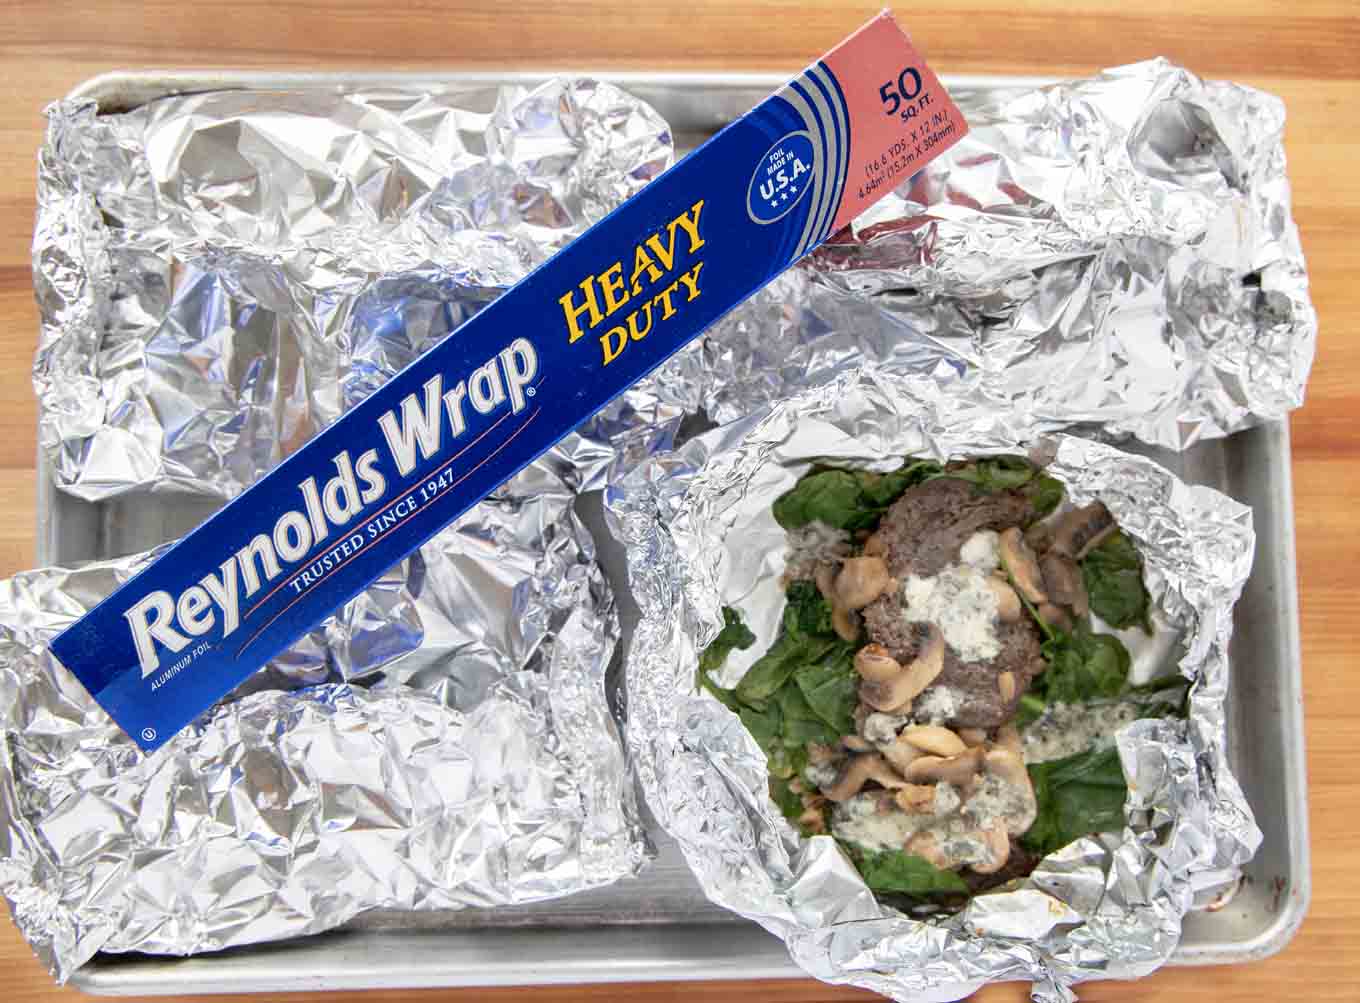 4 foil packets with one open showing the finished skirt steak on a sheet pan with a box of Reynolds foil across on the top 